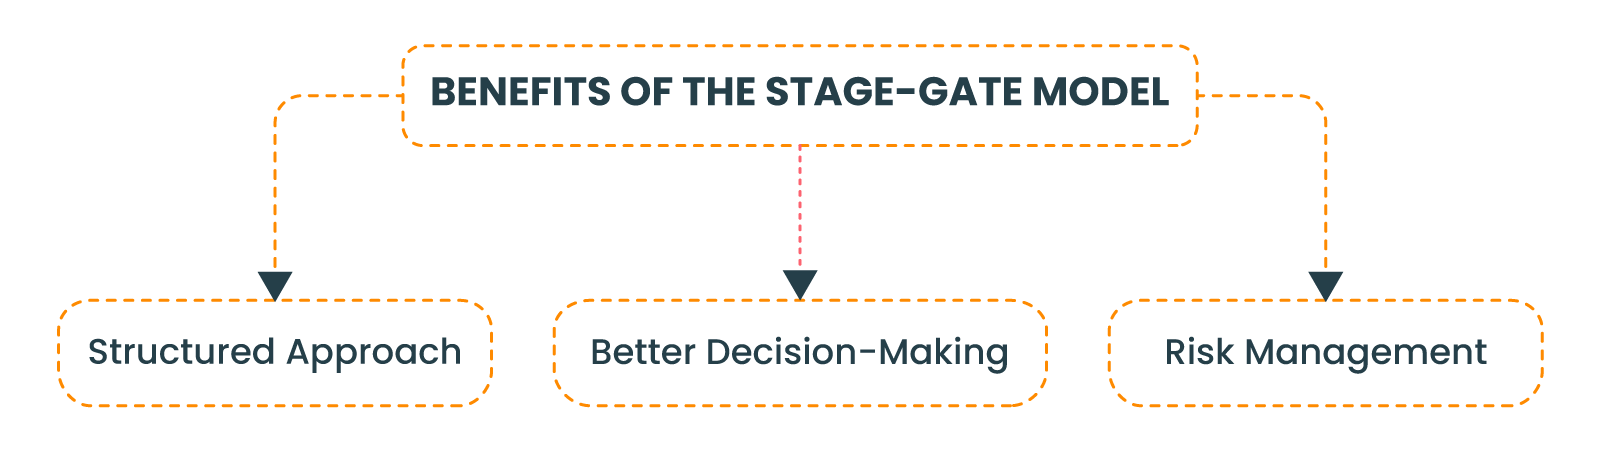 Benefits of the Stage-Gate Model